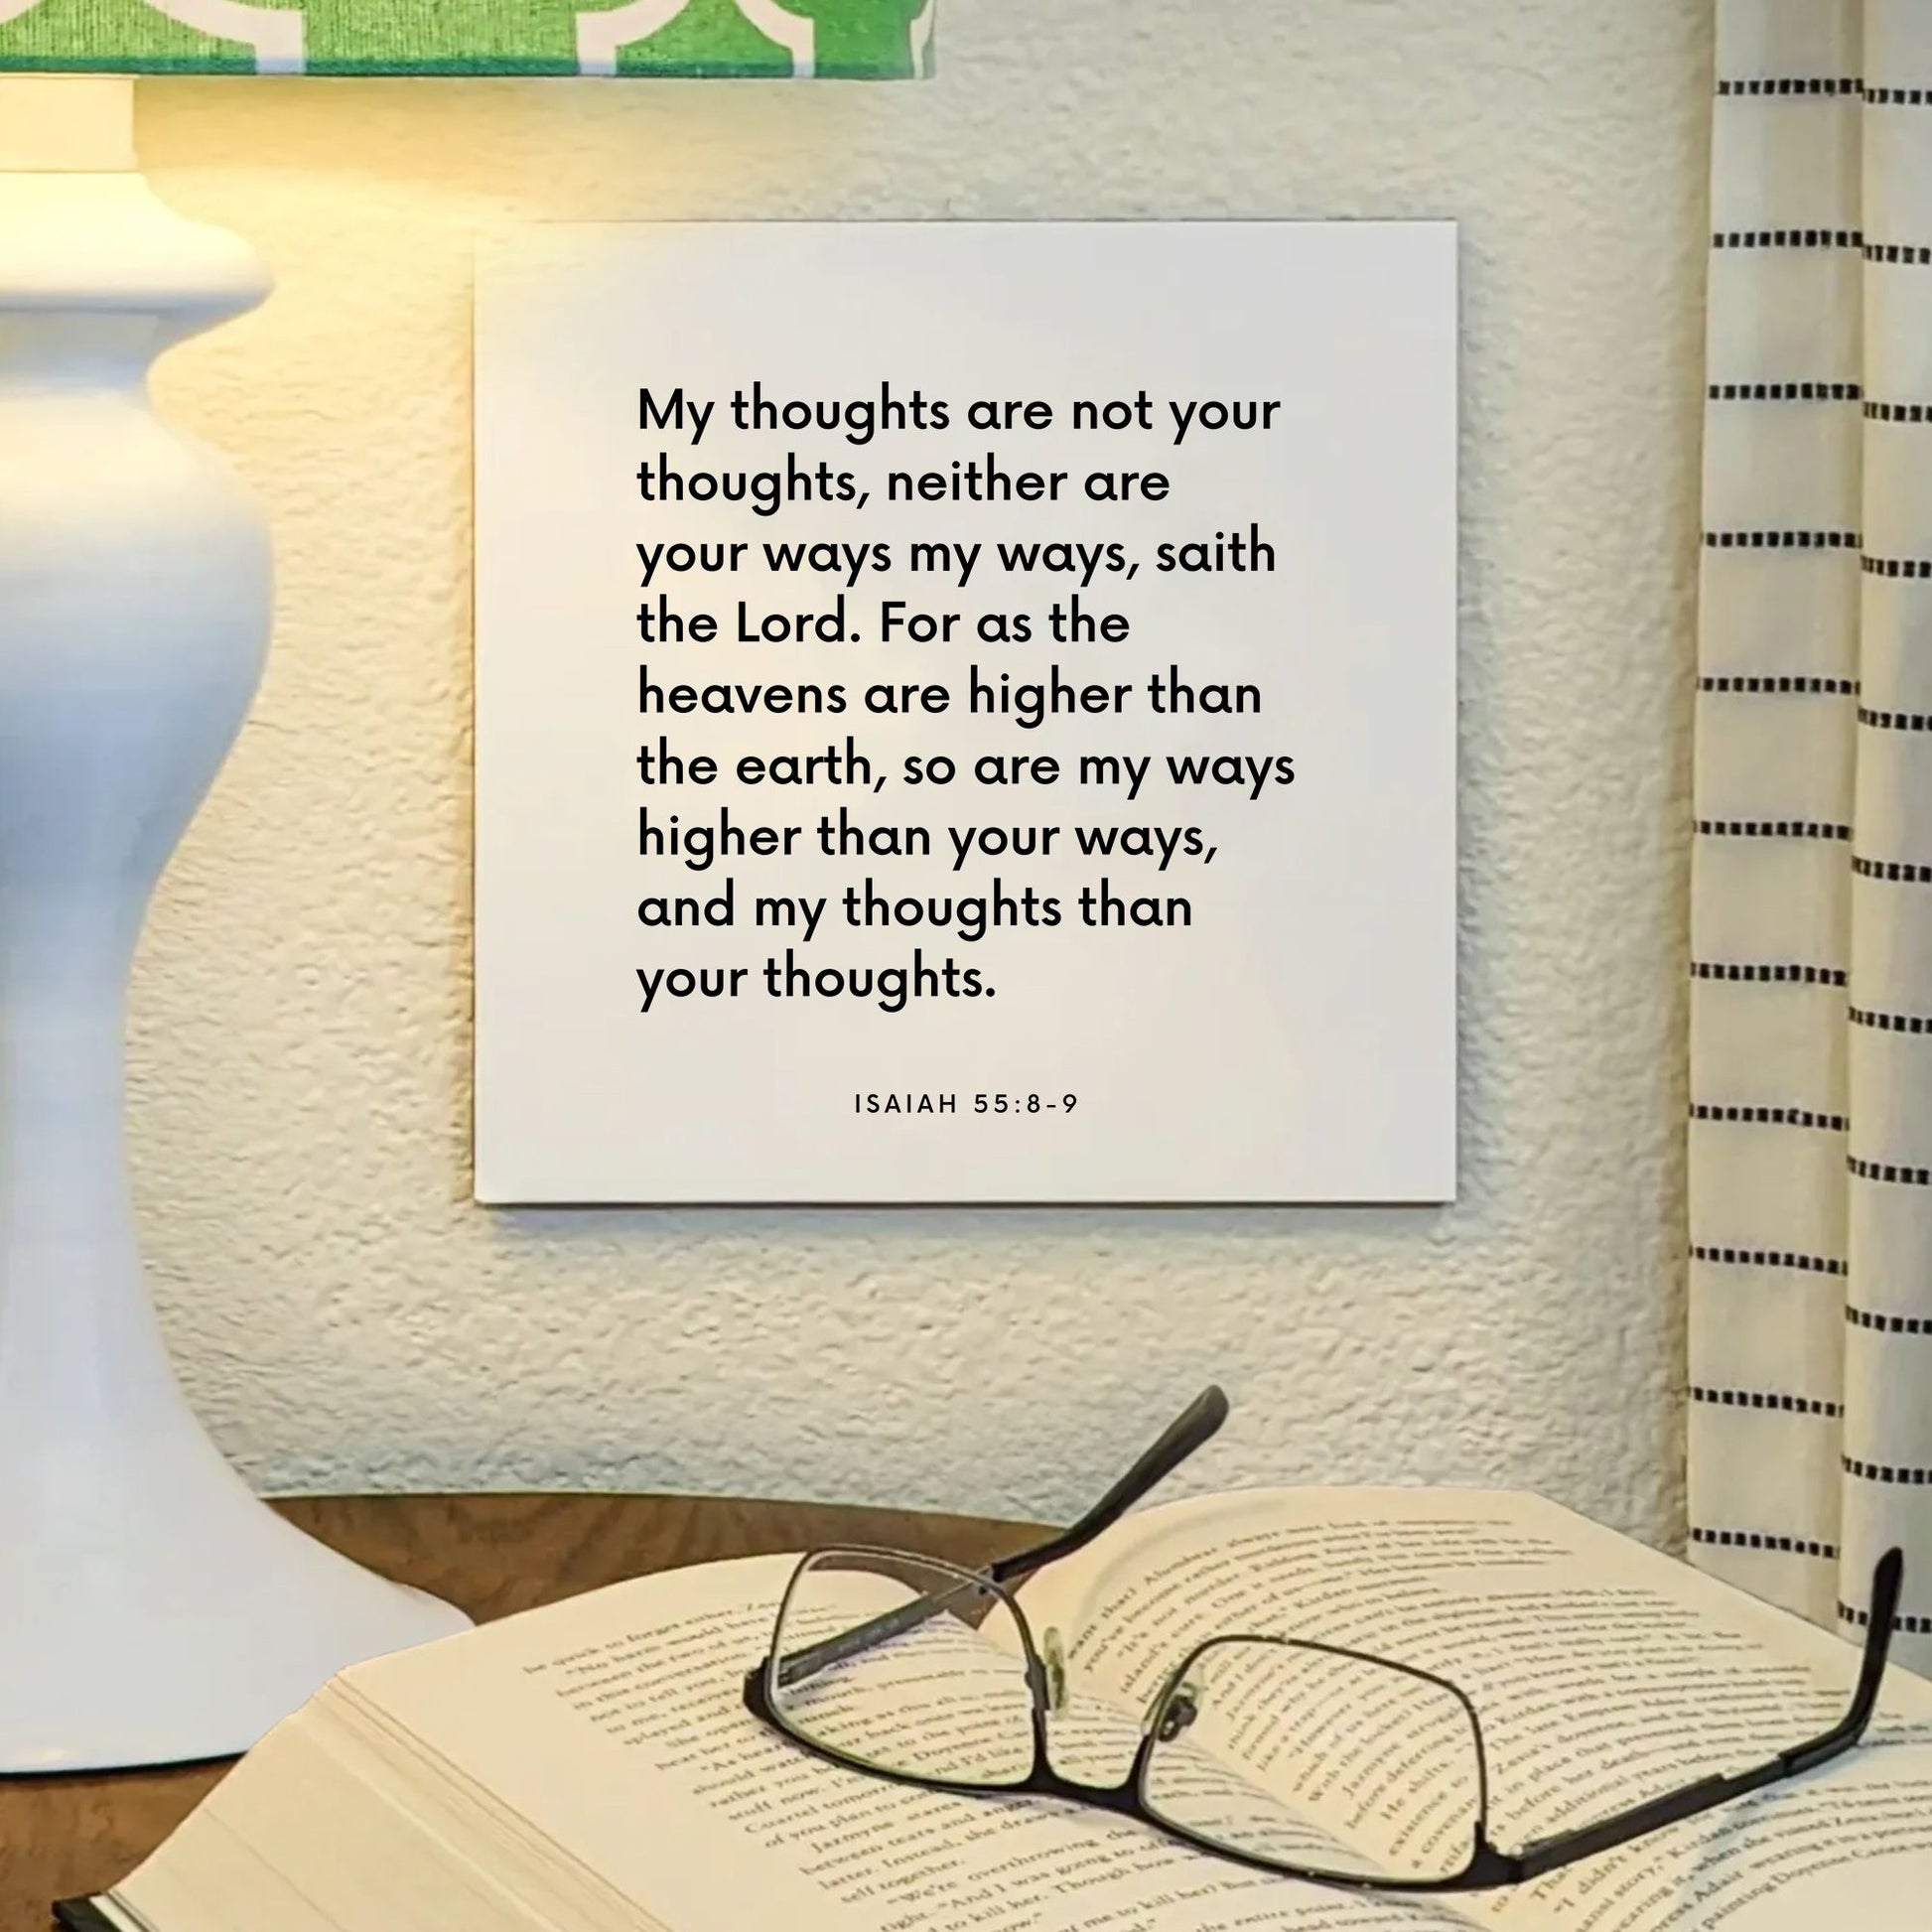 Lamp mouting of the scripture tile for Isaiah 55:8-9 - "My thoughts are not your thoughts, neither your ways my ways"